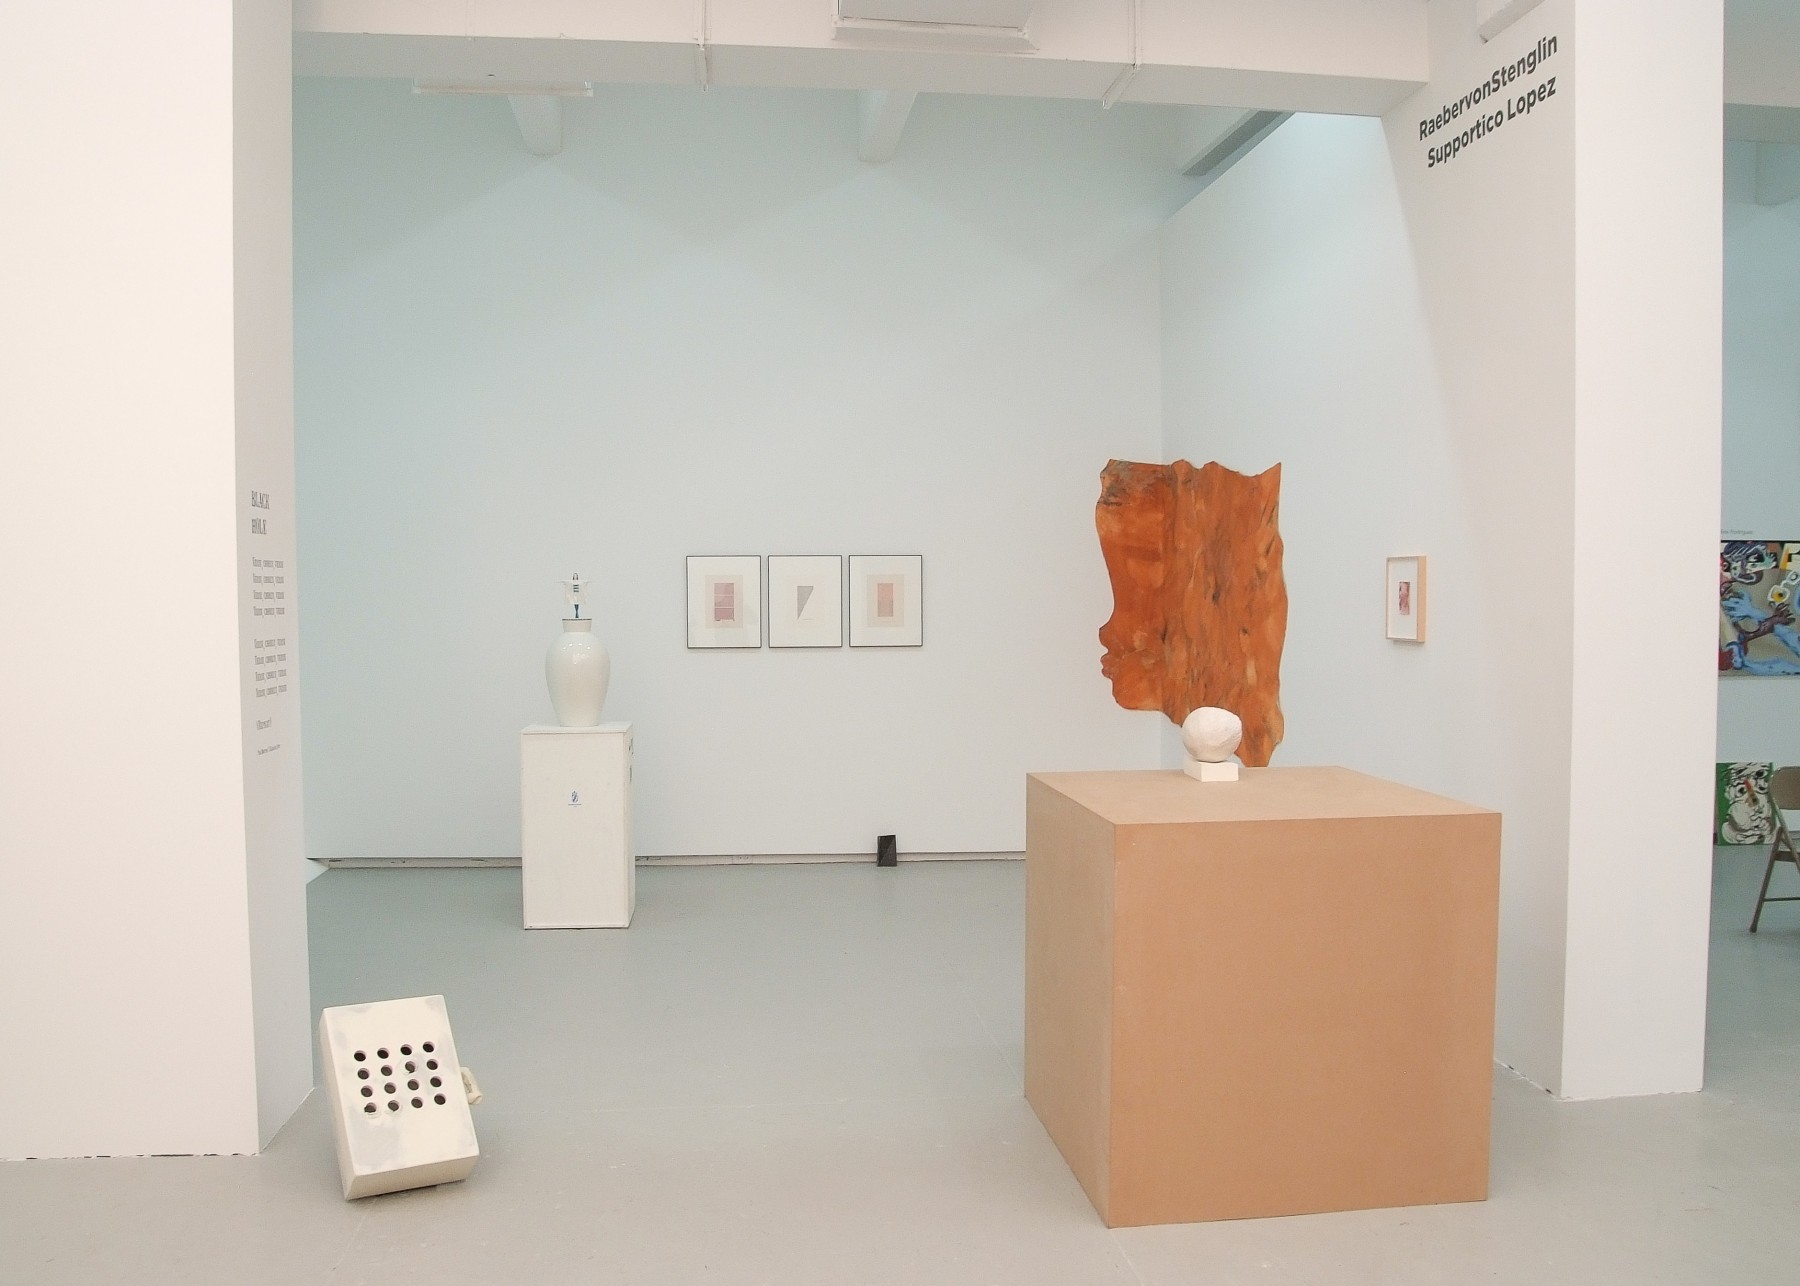 Supportico Lopez at Independent New York, 2012, exhibition view